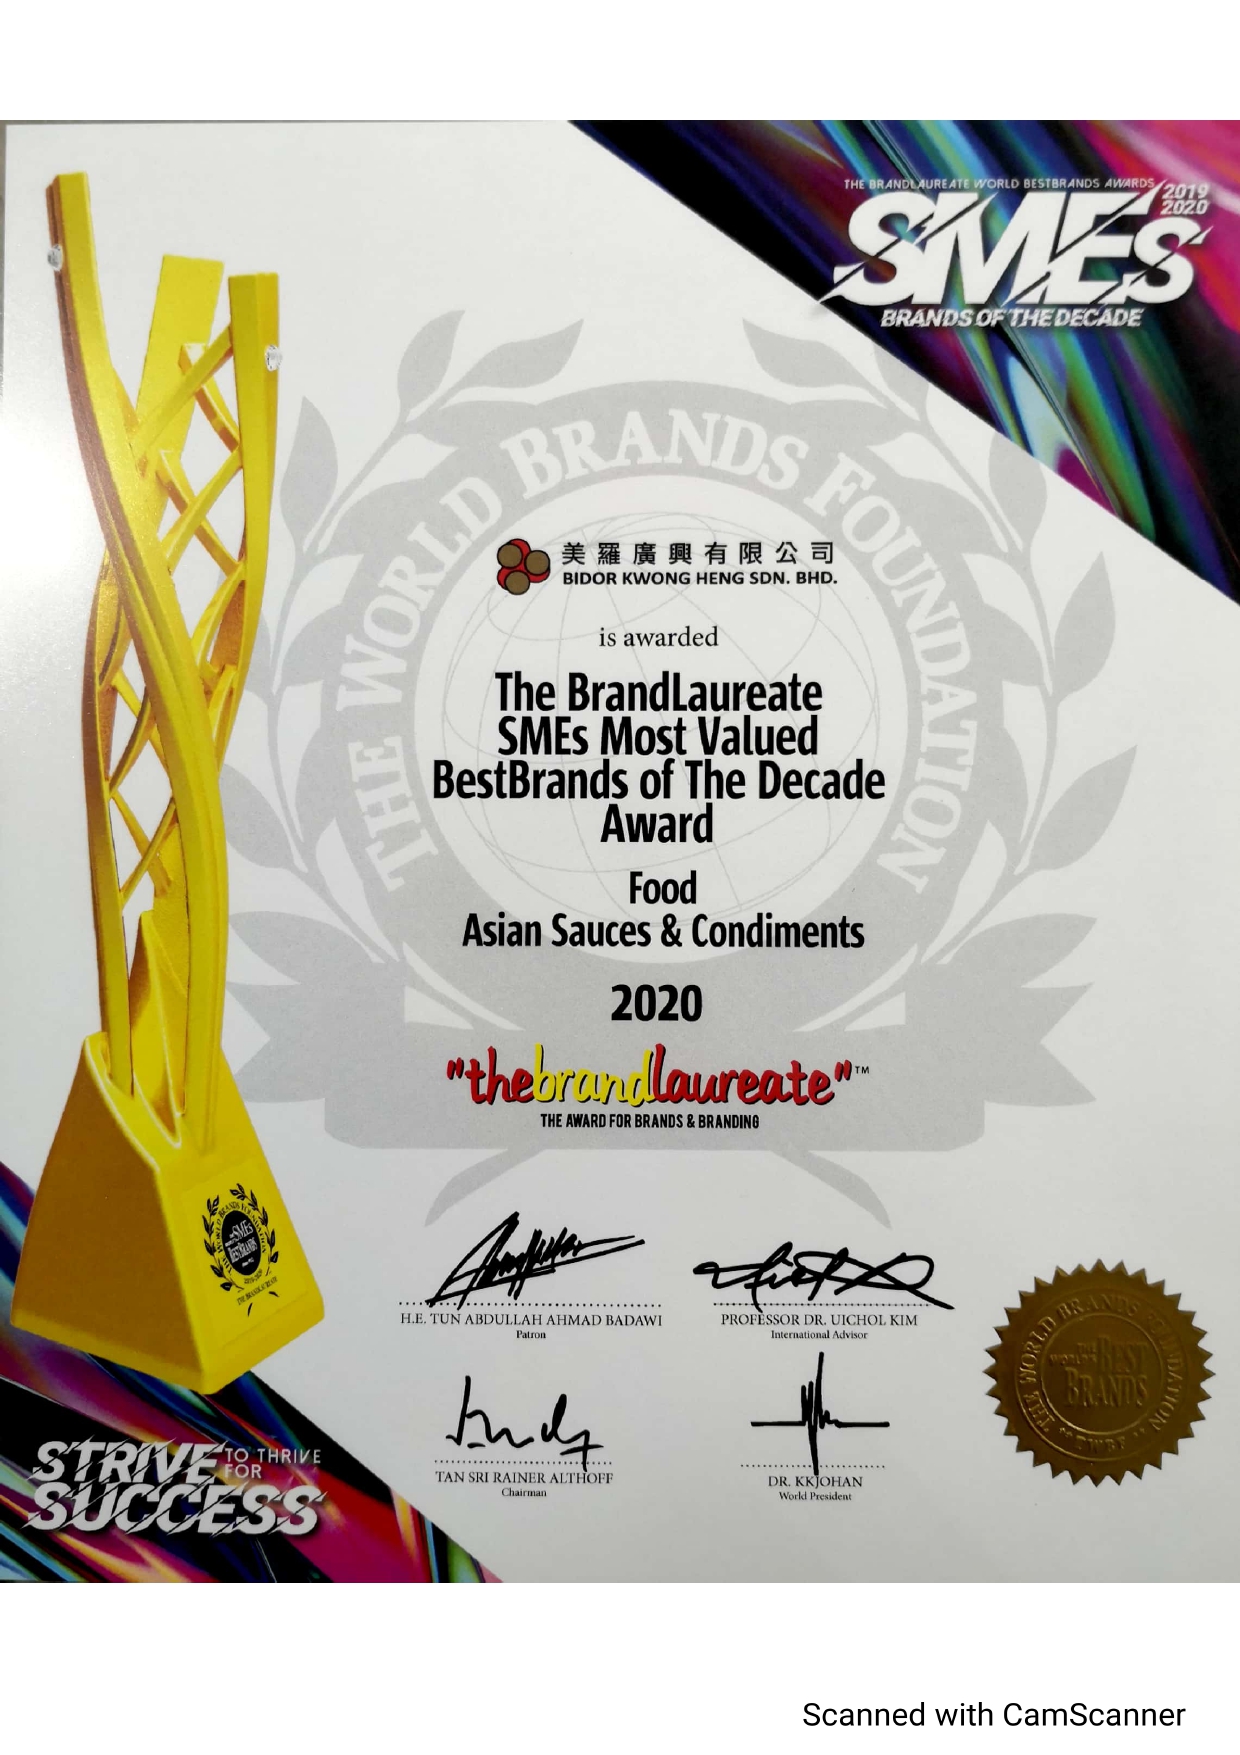 The BrandLaureate SMEs Most Valued BestBrands of The Decade Award 2020